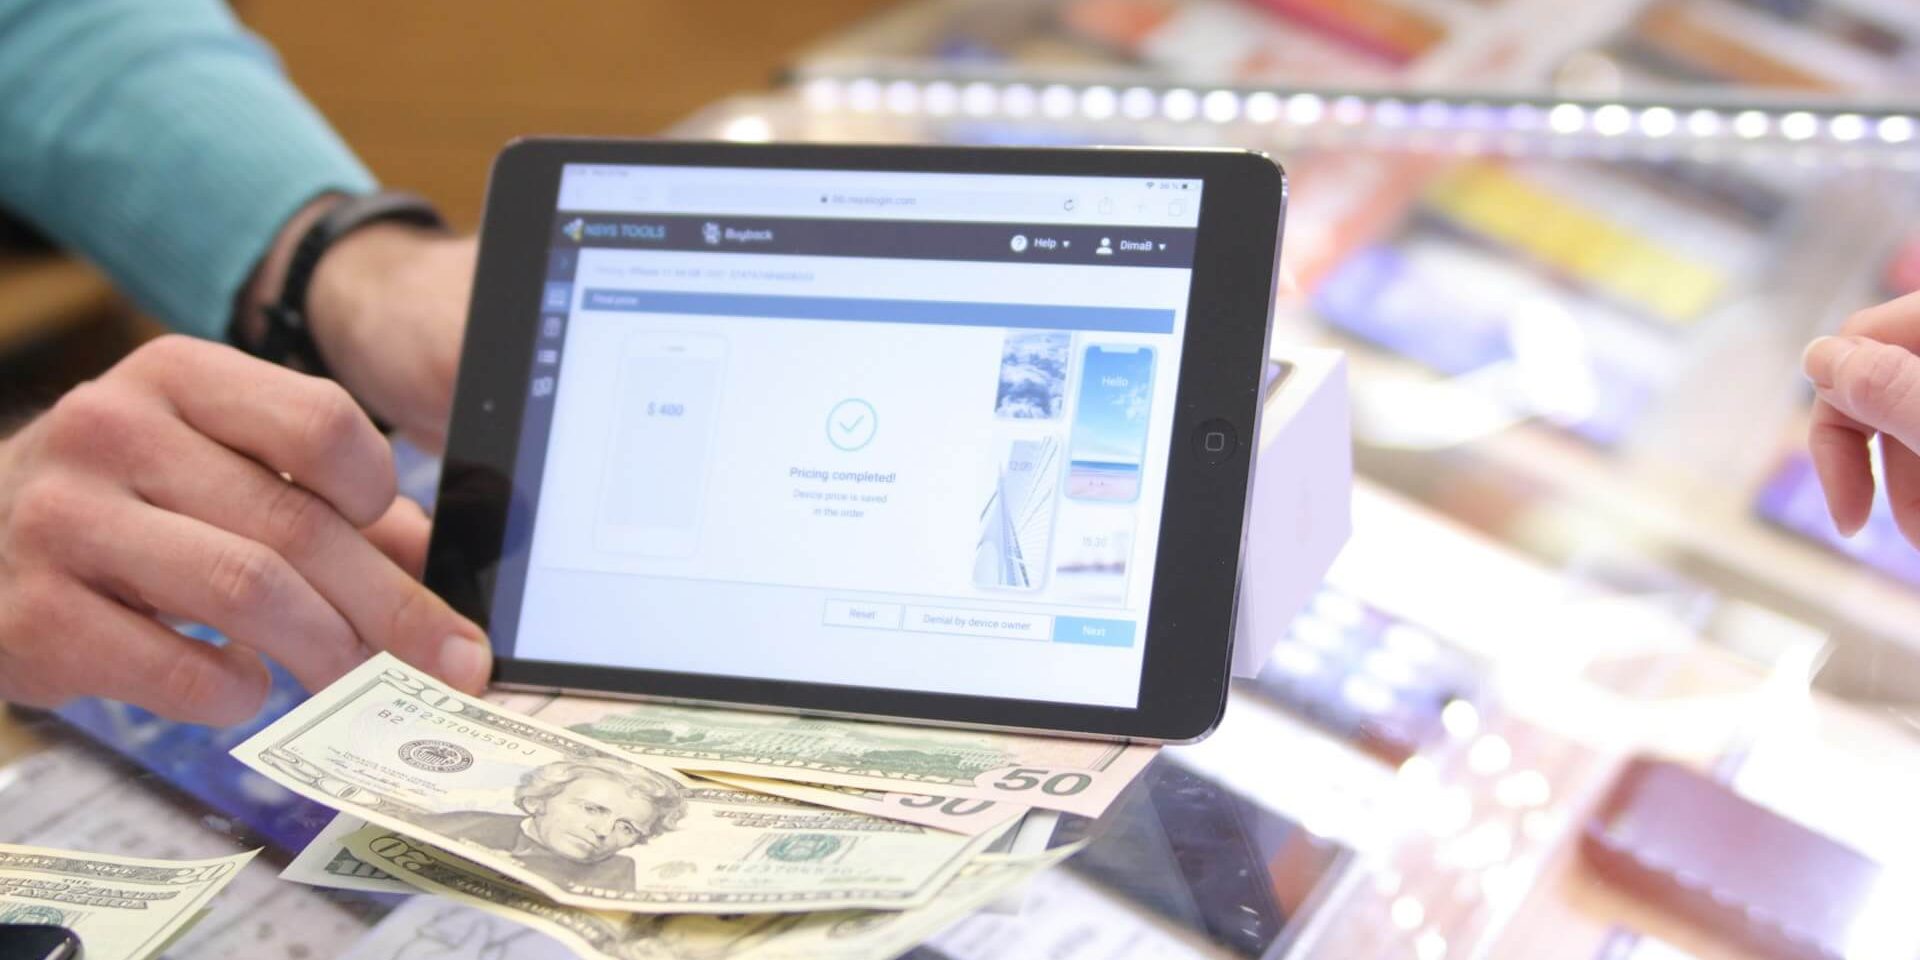 The image depicts a smartphone and accessories store, cashier holding a tablet for payment, and some cash on the counter.